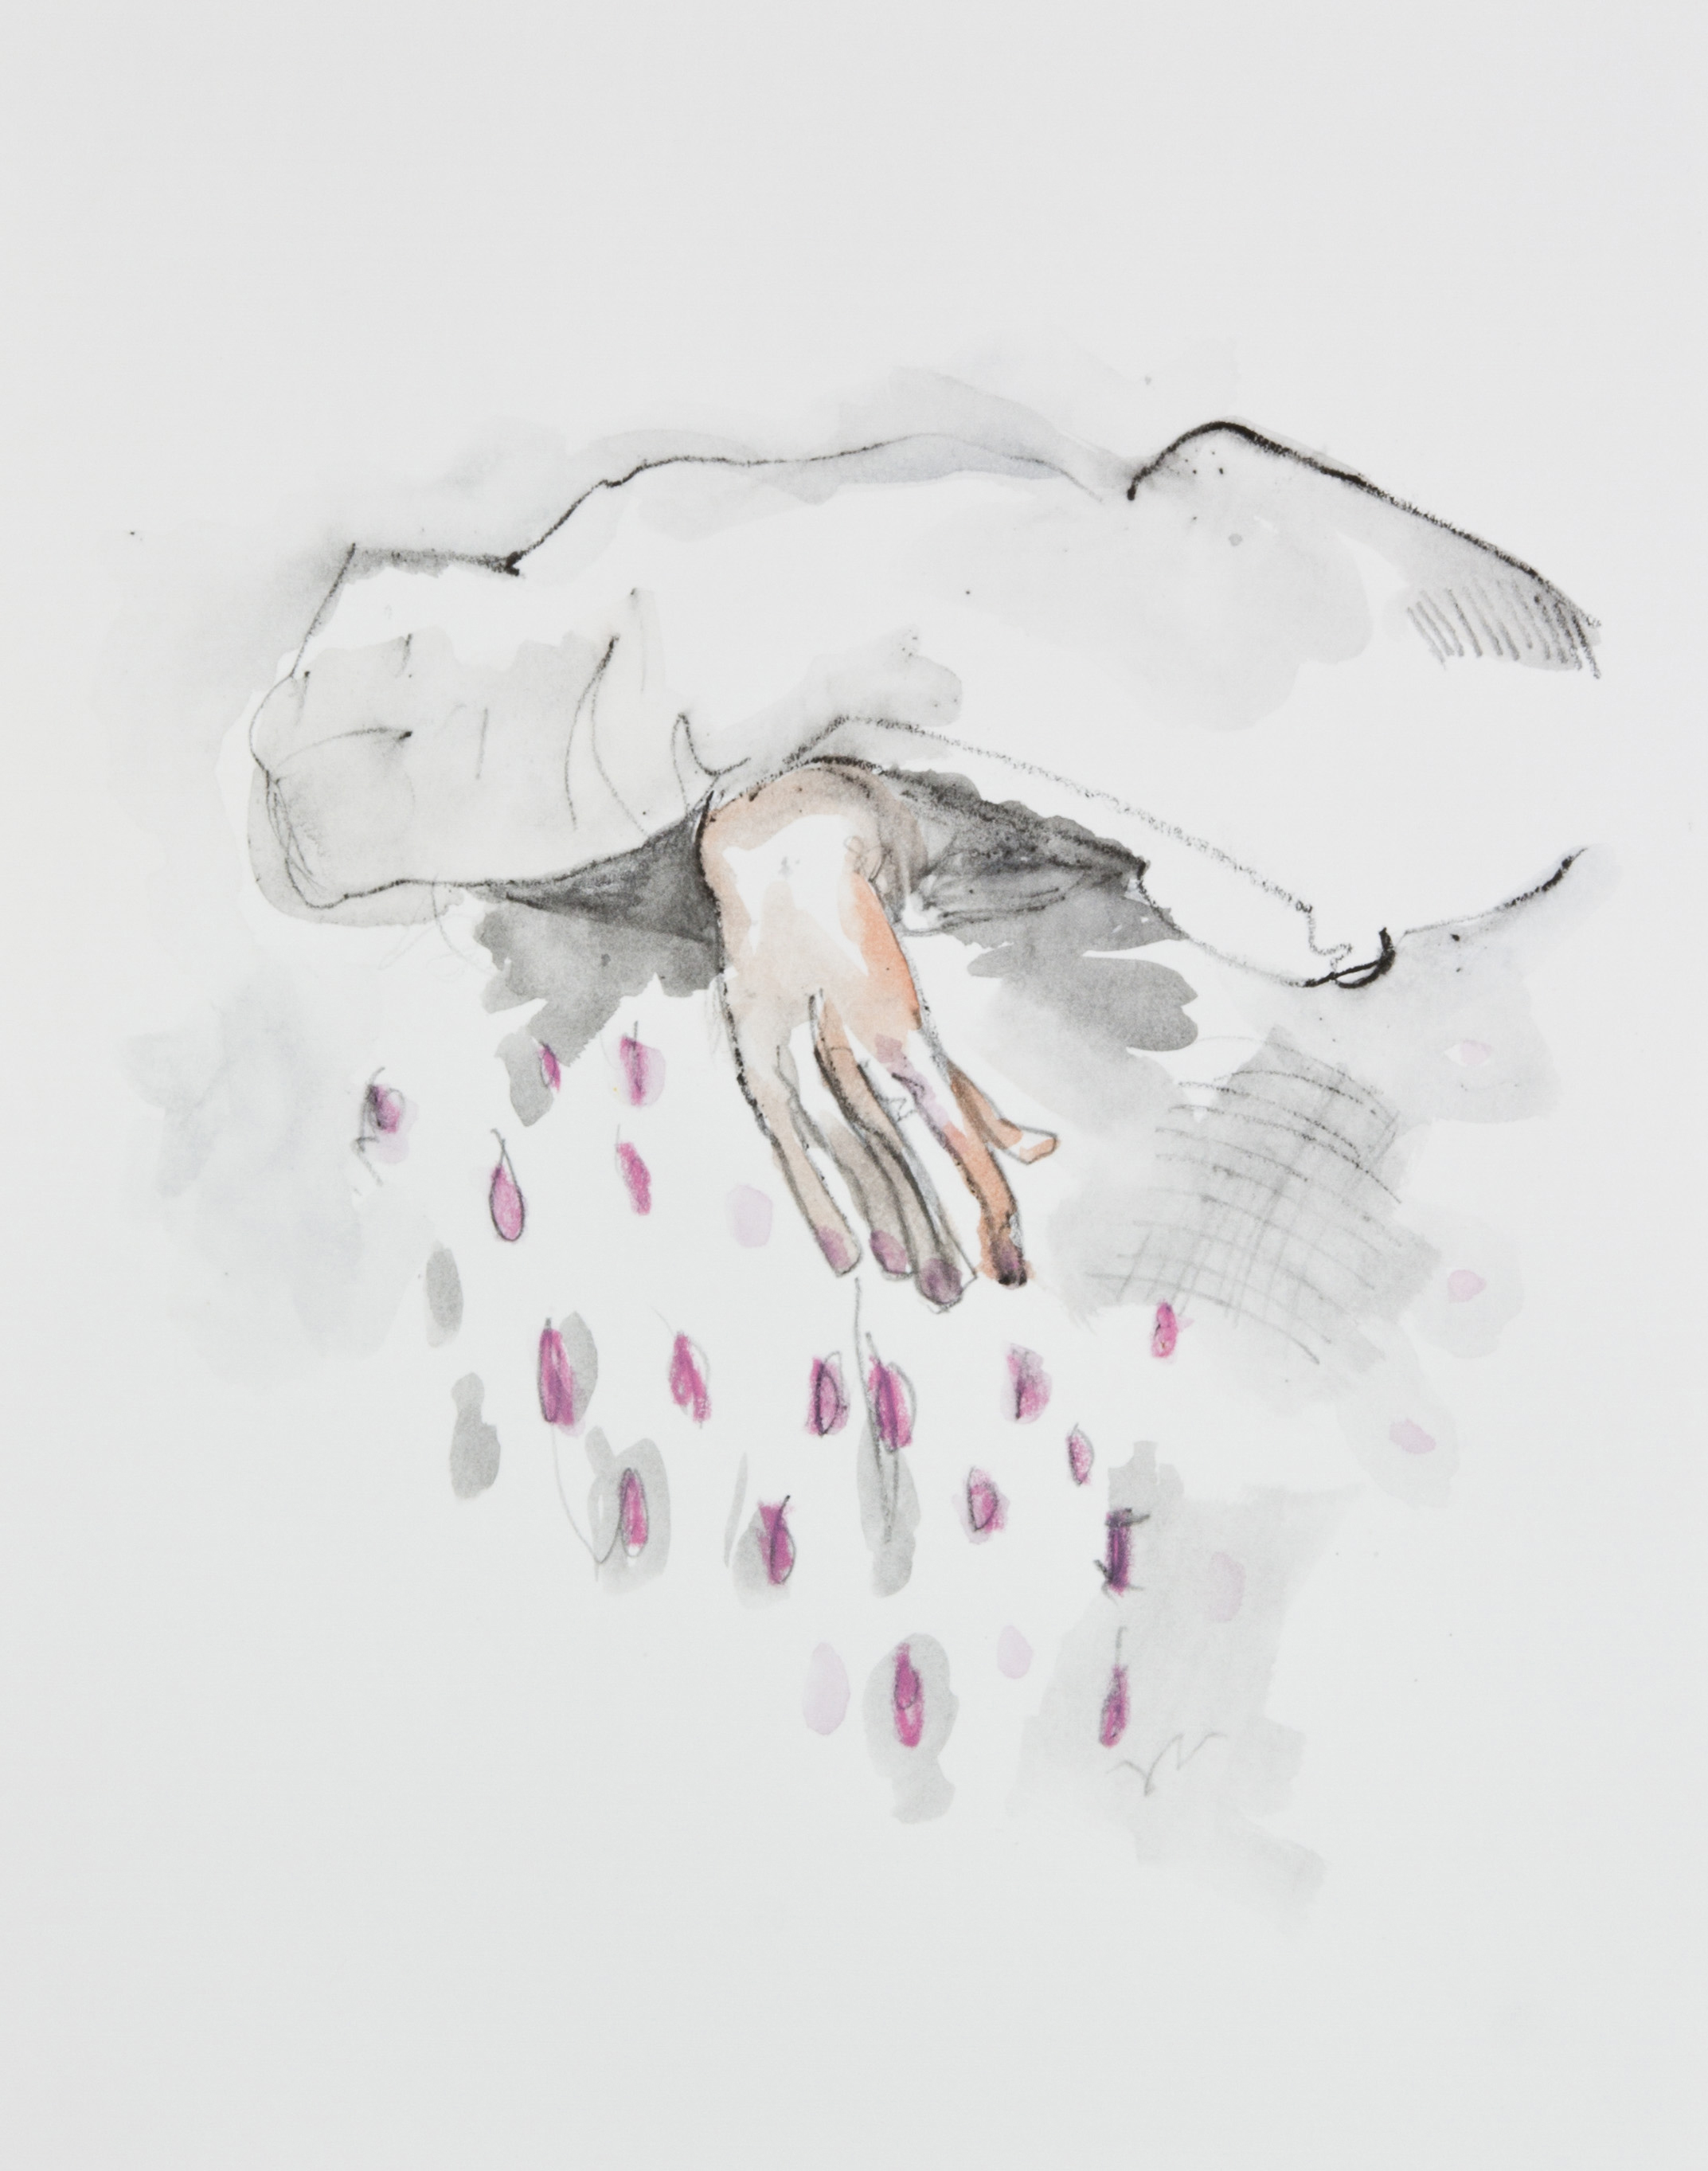 Pink Rain, 2013, graphite, crayon and watercolor pencil on paper, 11x14 inches